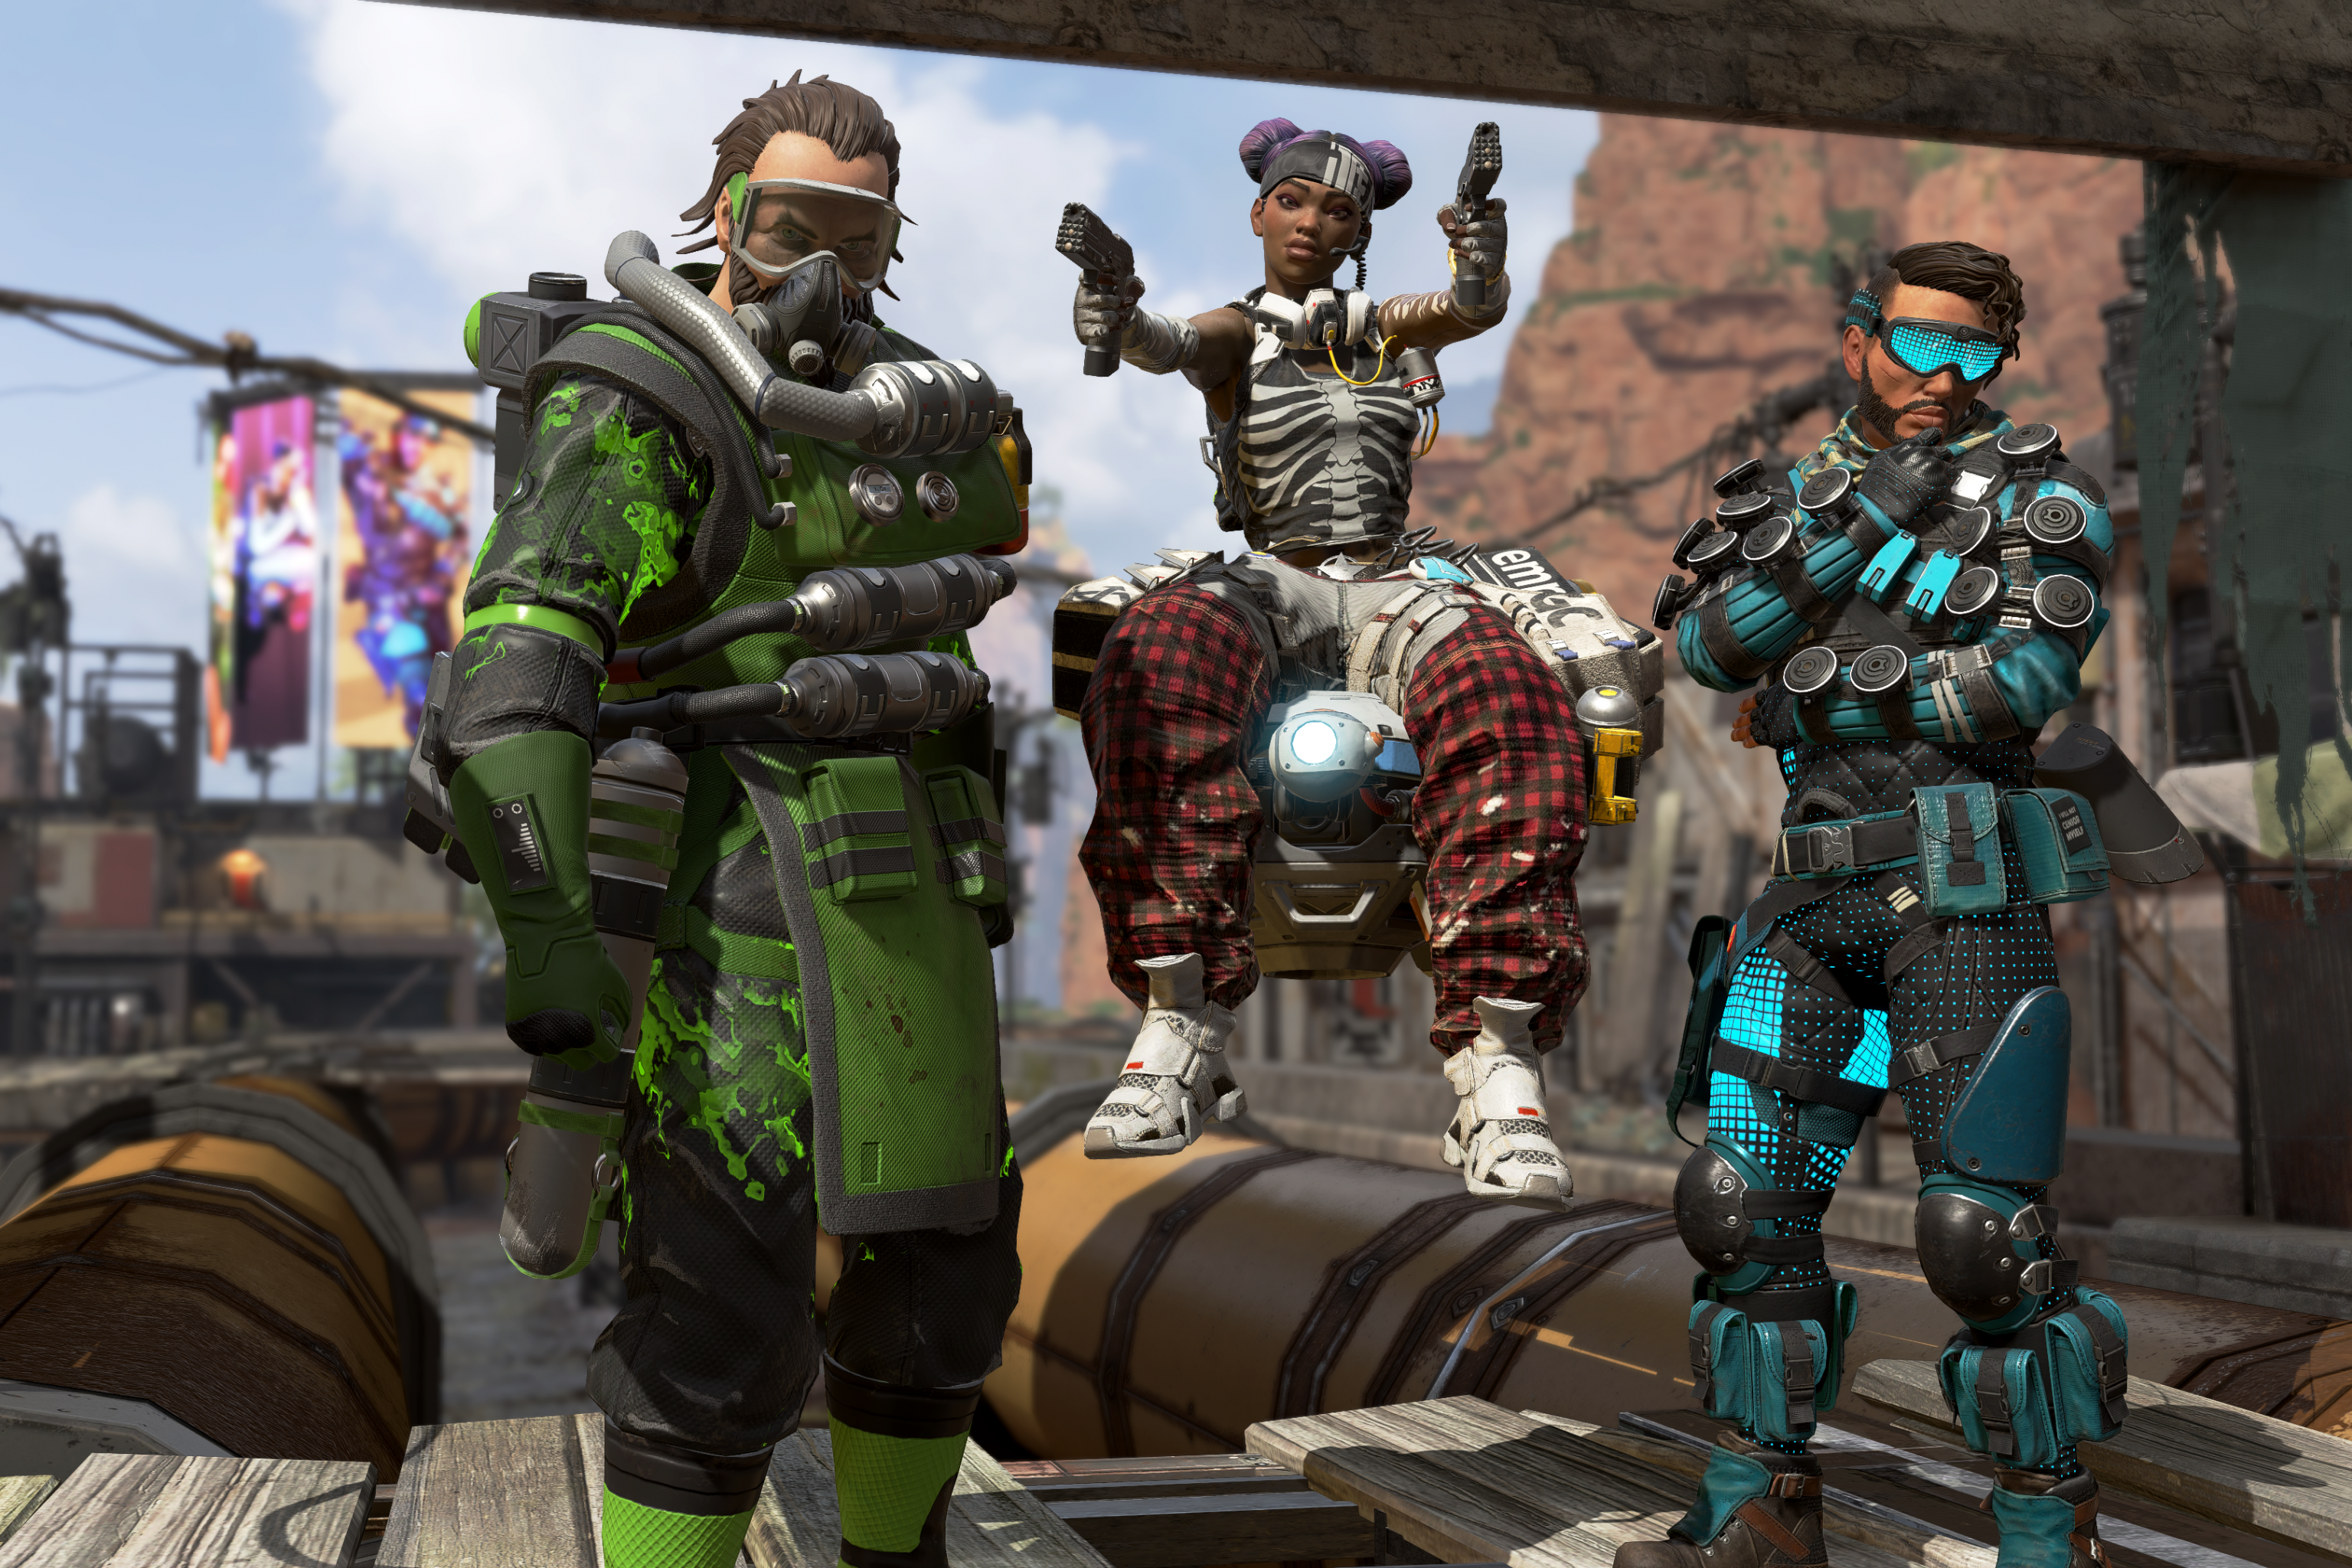 15 expert tips to help you win in Apex Legends